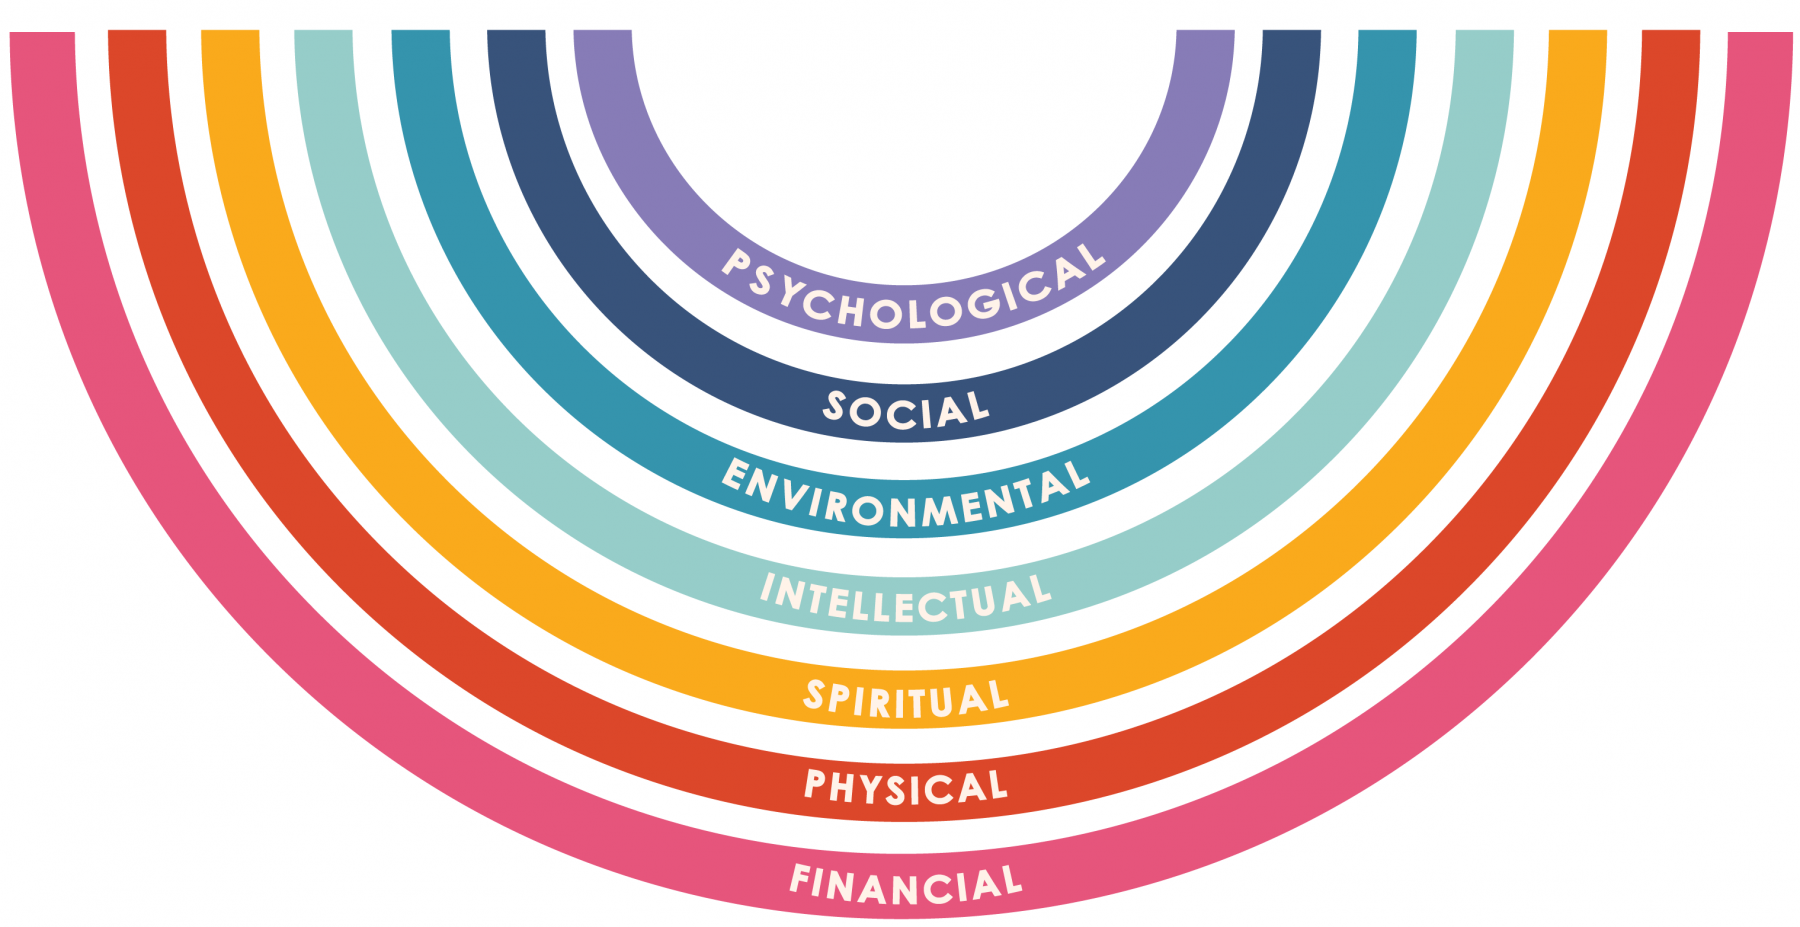 Wellness Matters Logo with 7 dimensions:  psychological (emotional), physical, intellectual, environmental, social, financial, and spiritual wellness.